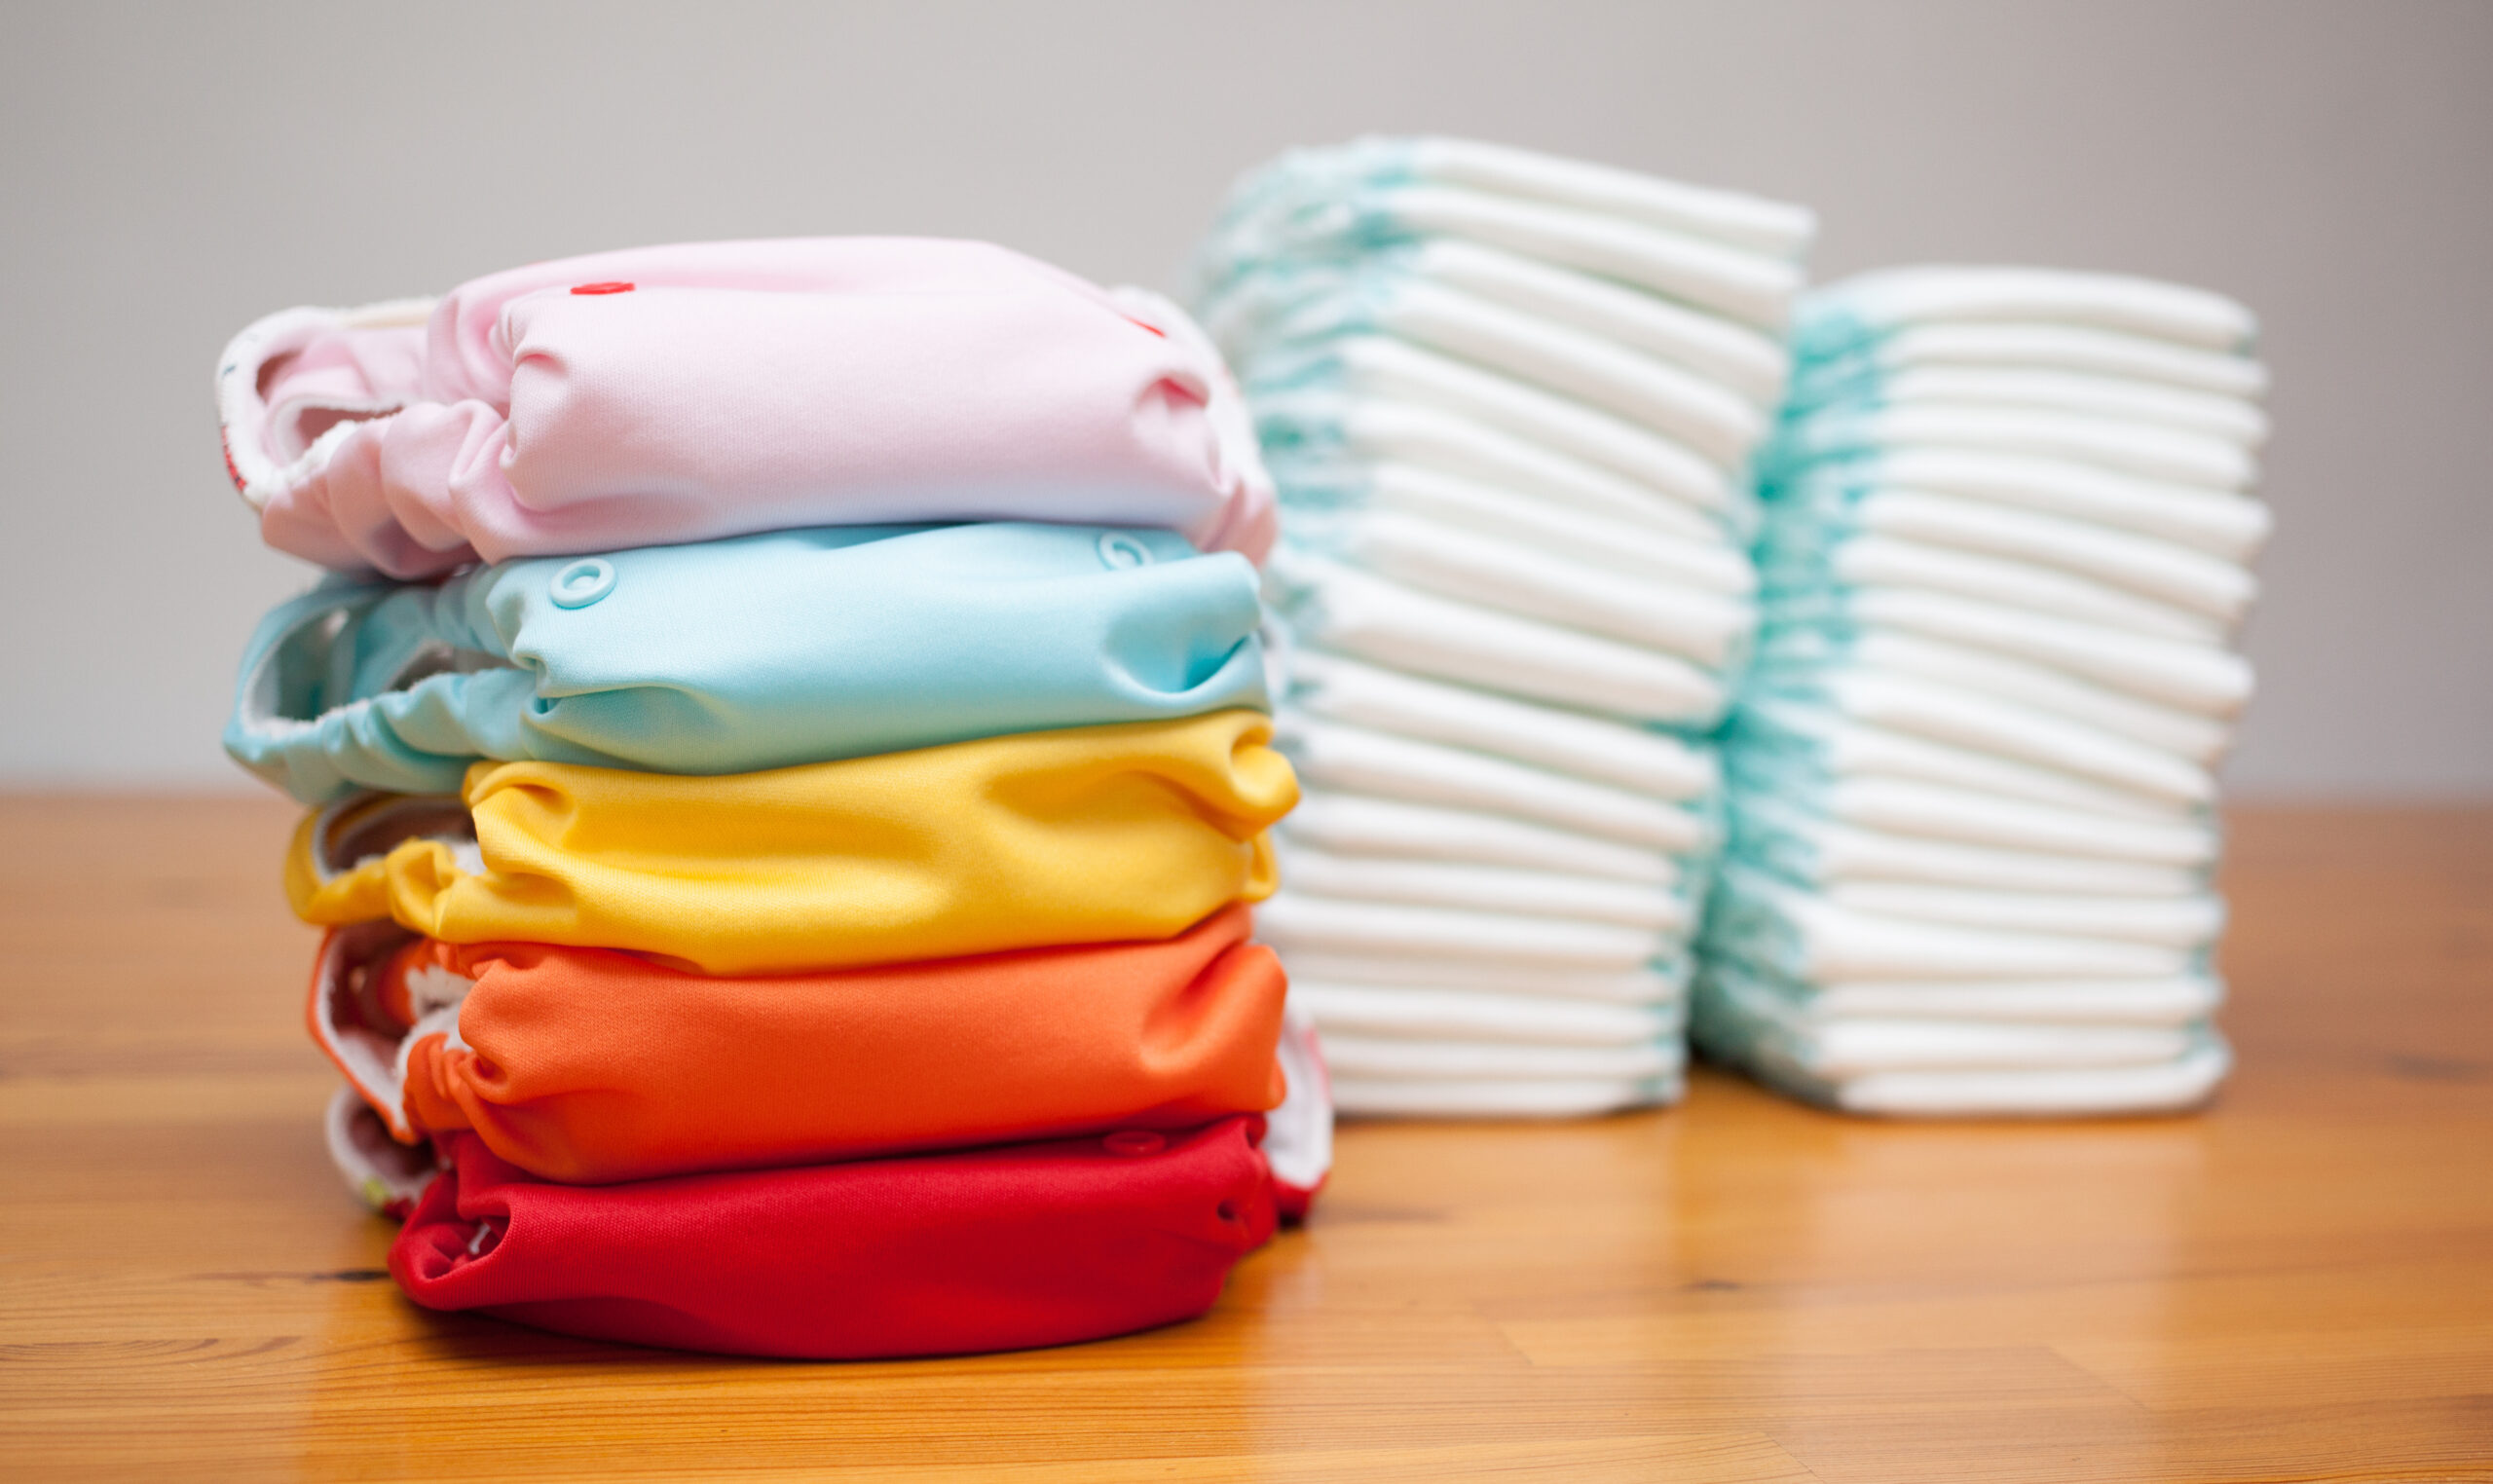 Stacks of disposable diapers and modern diapers together